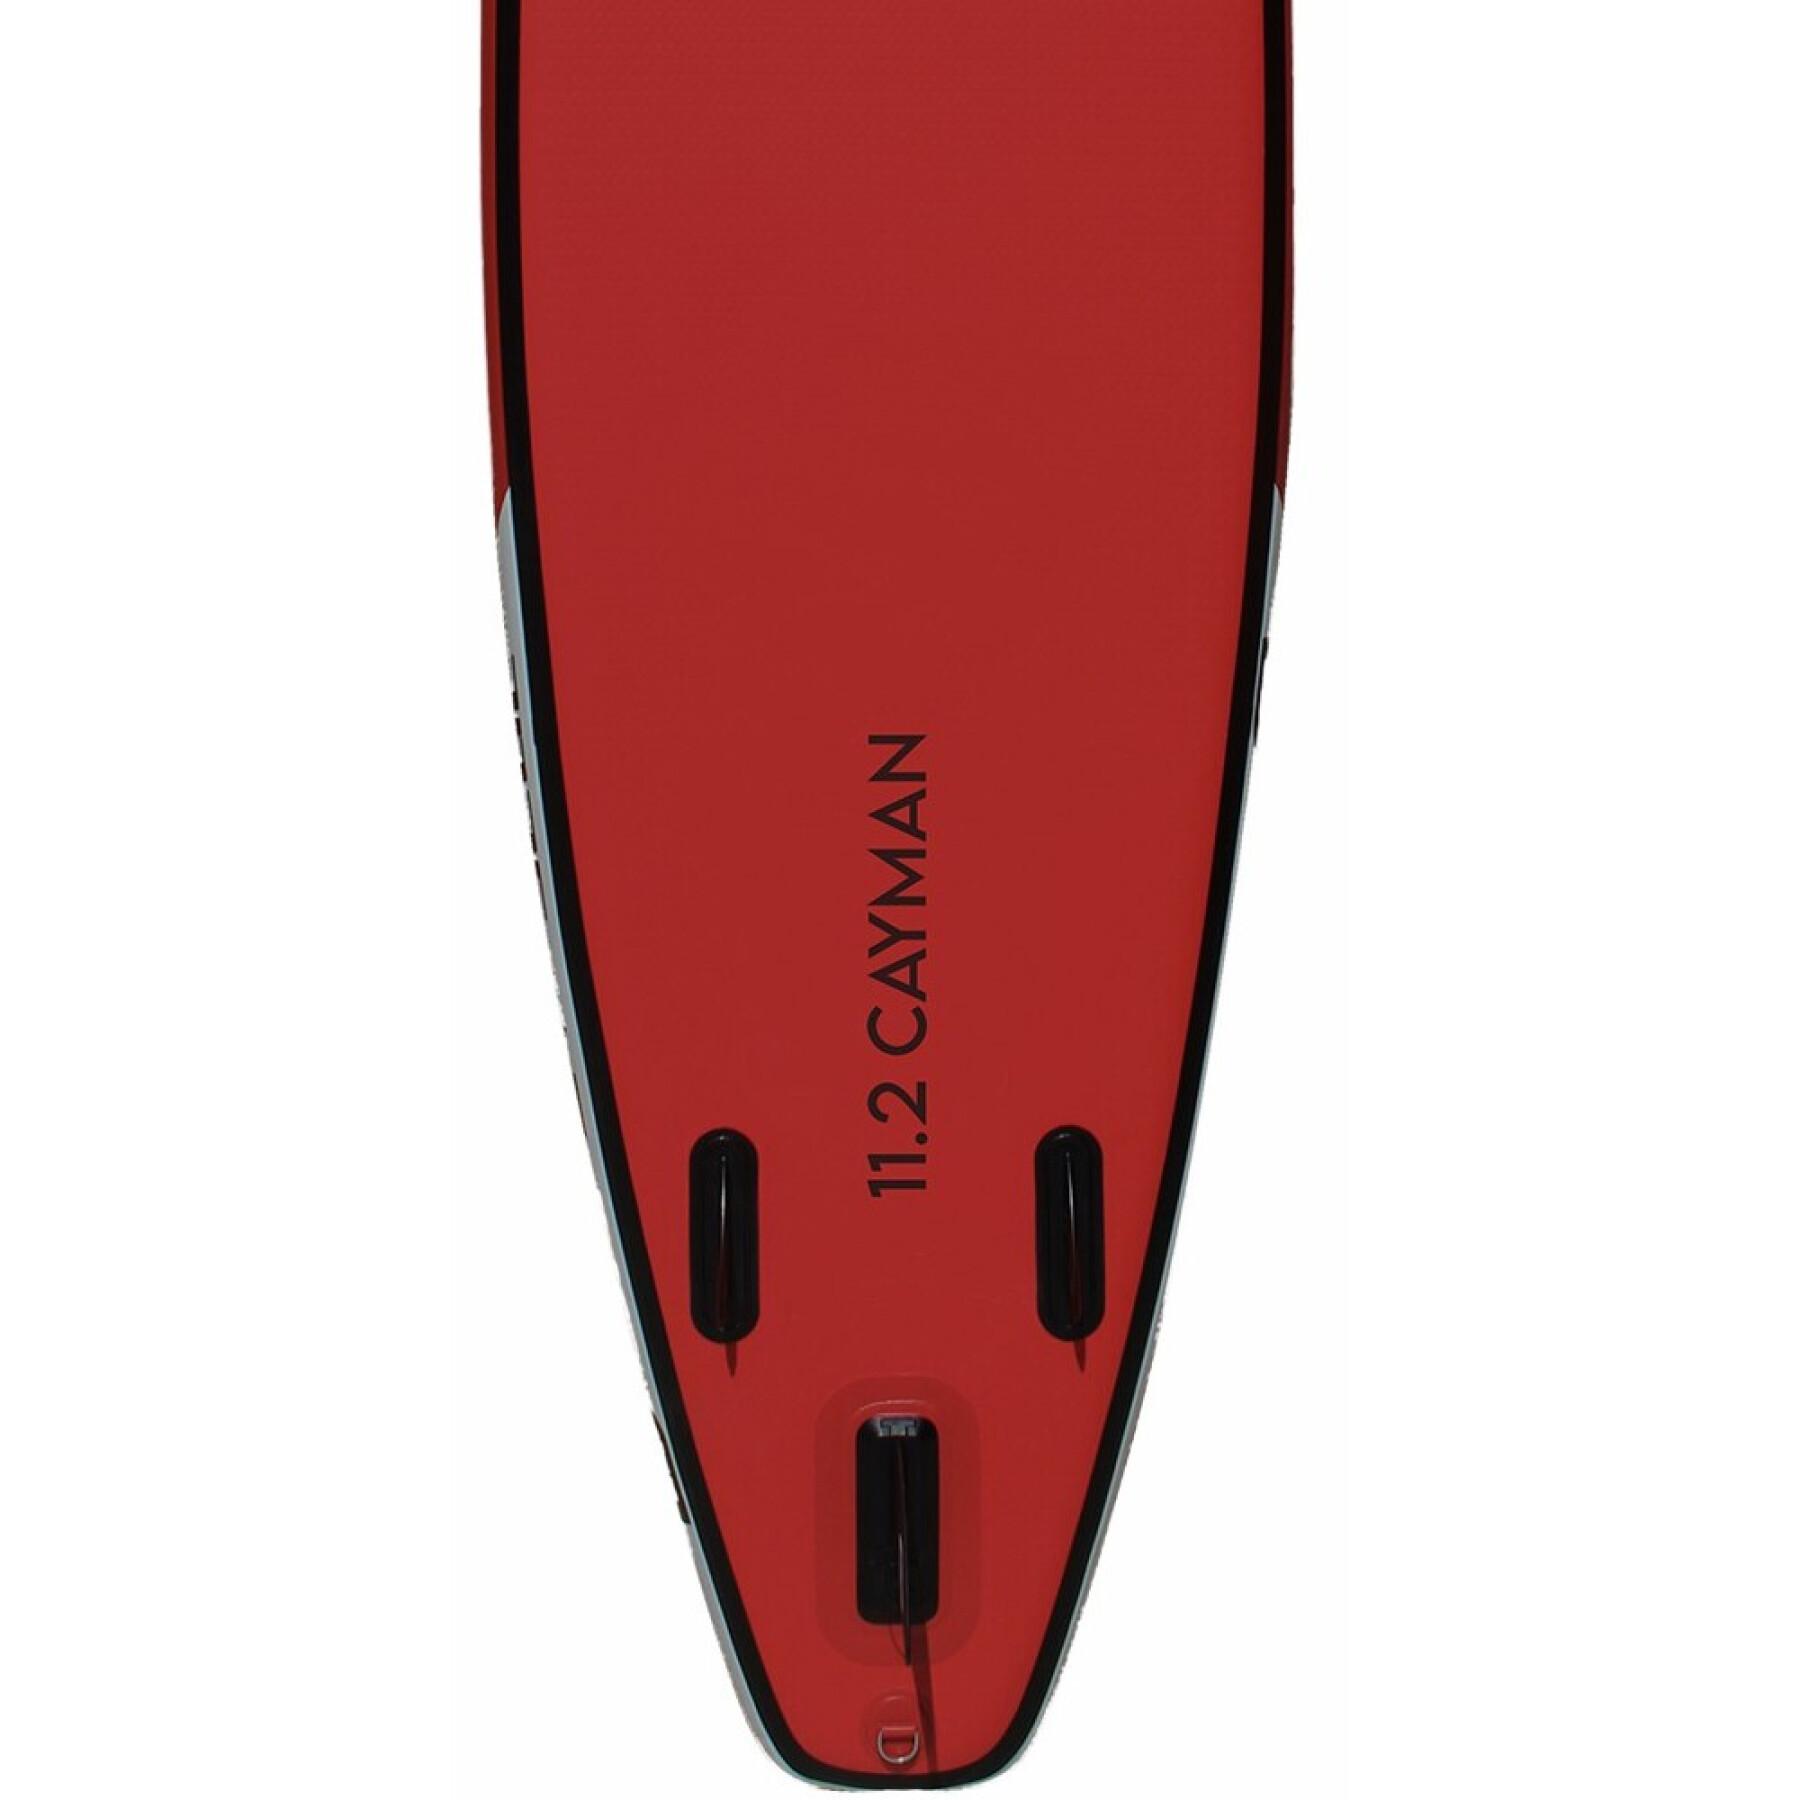 Stand Up Paddle gonflable Safe Waterman Cayman Touring - 11’2